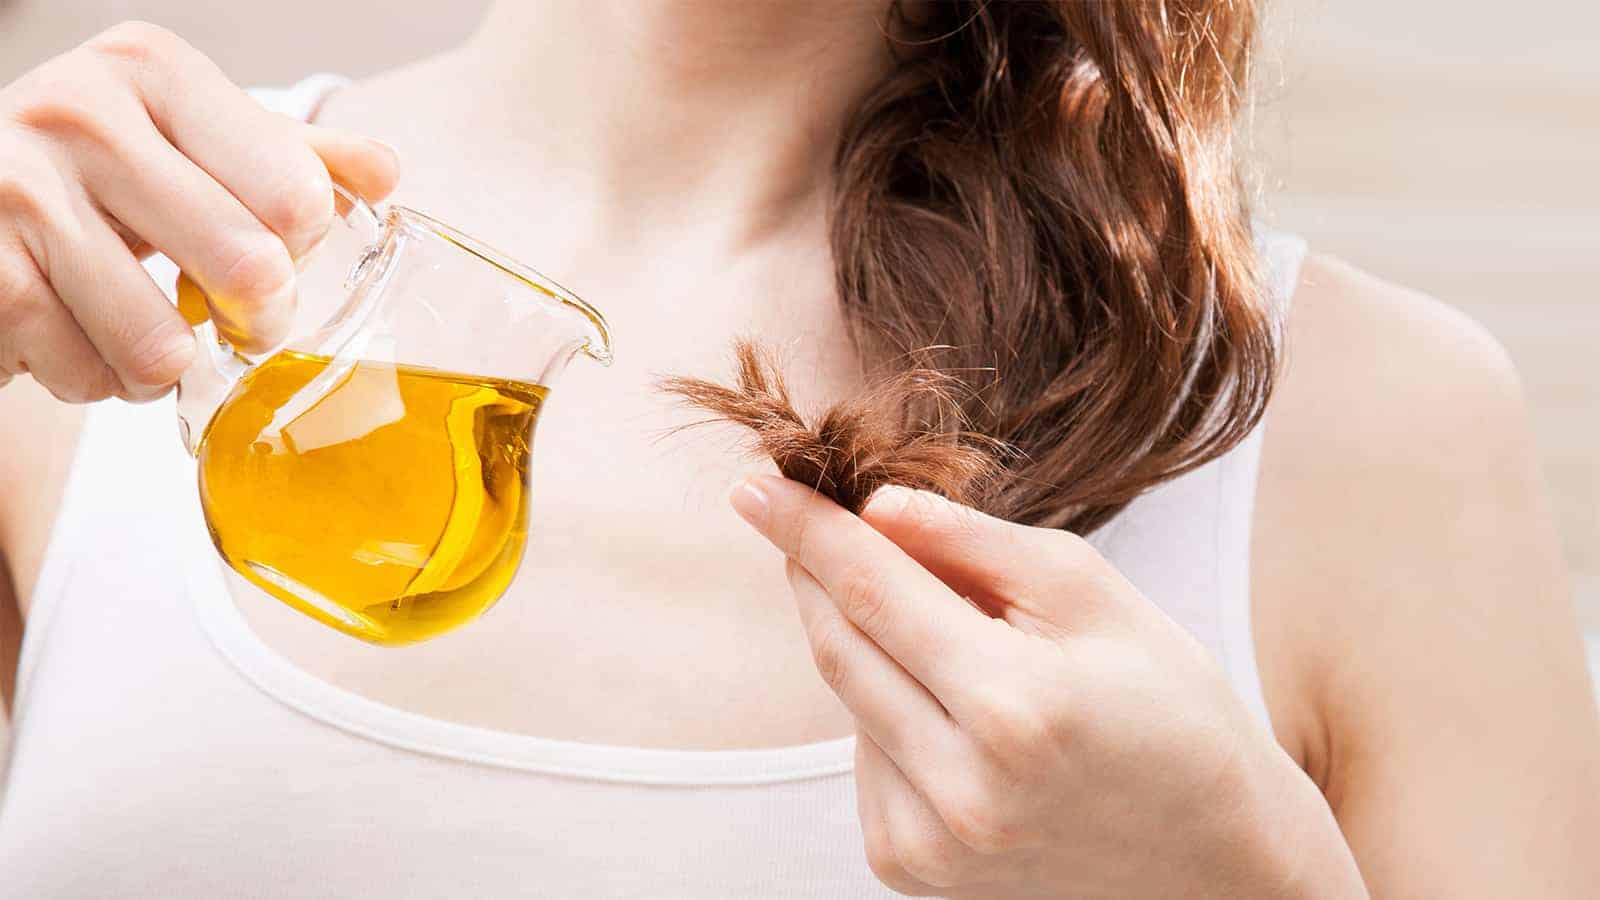 Researchers Reveal: Olive Oil Linked to Hair Growth